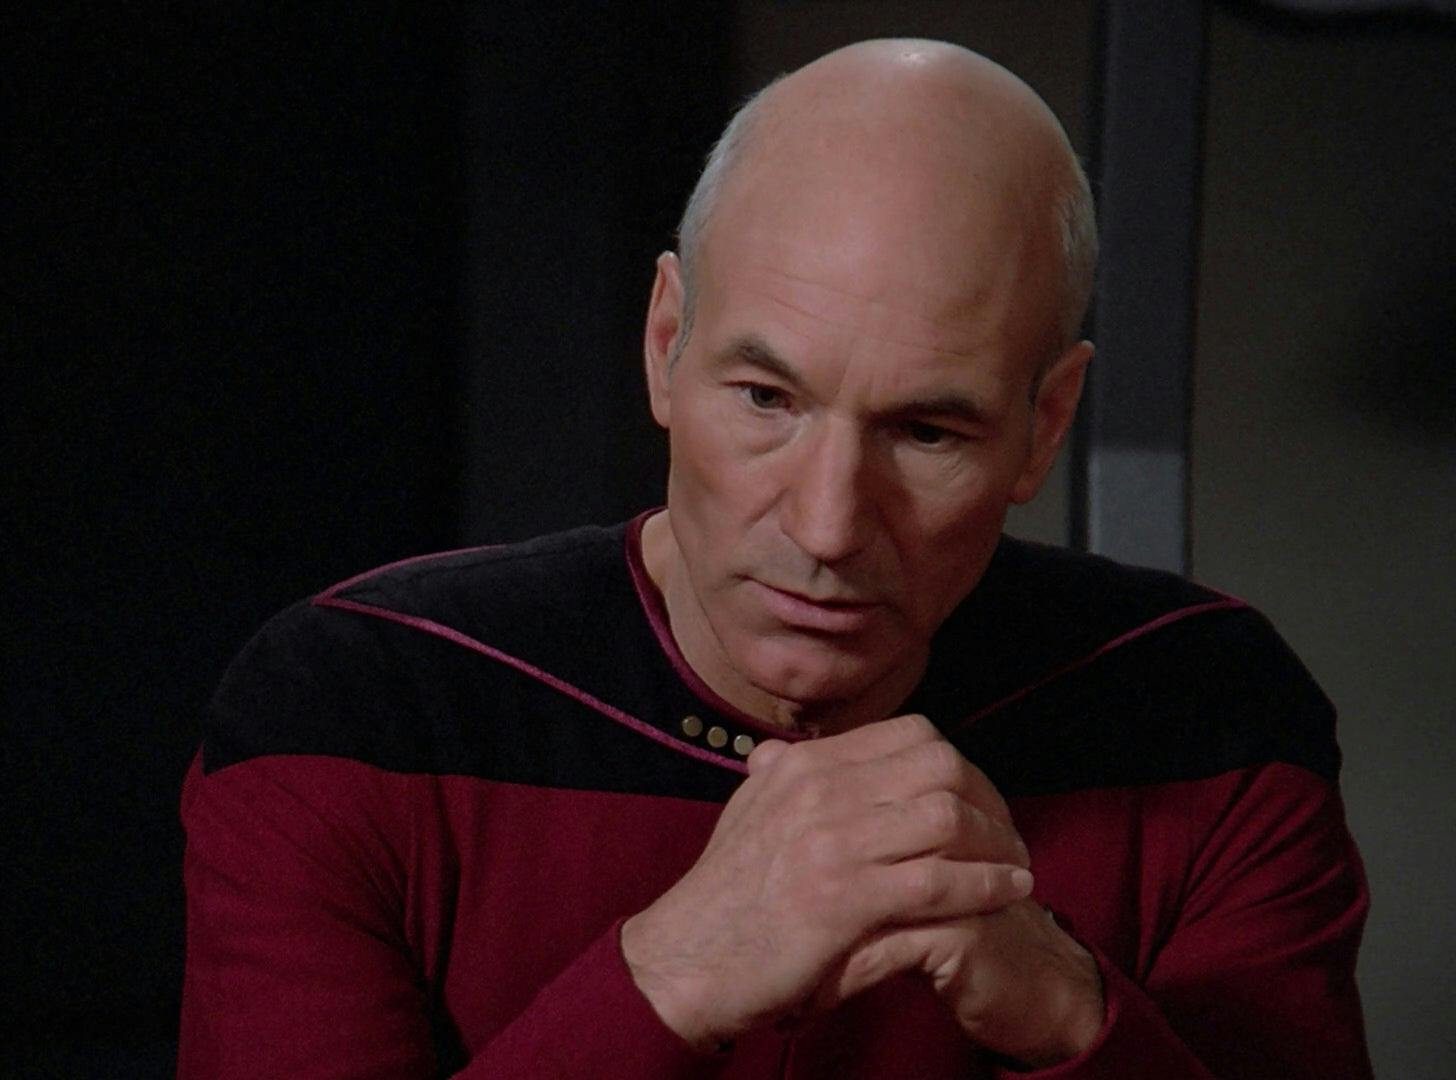 Captain Picard pondering what his next move should be.